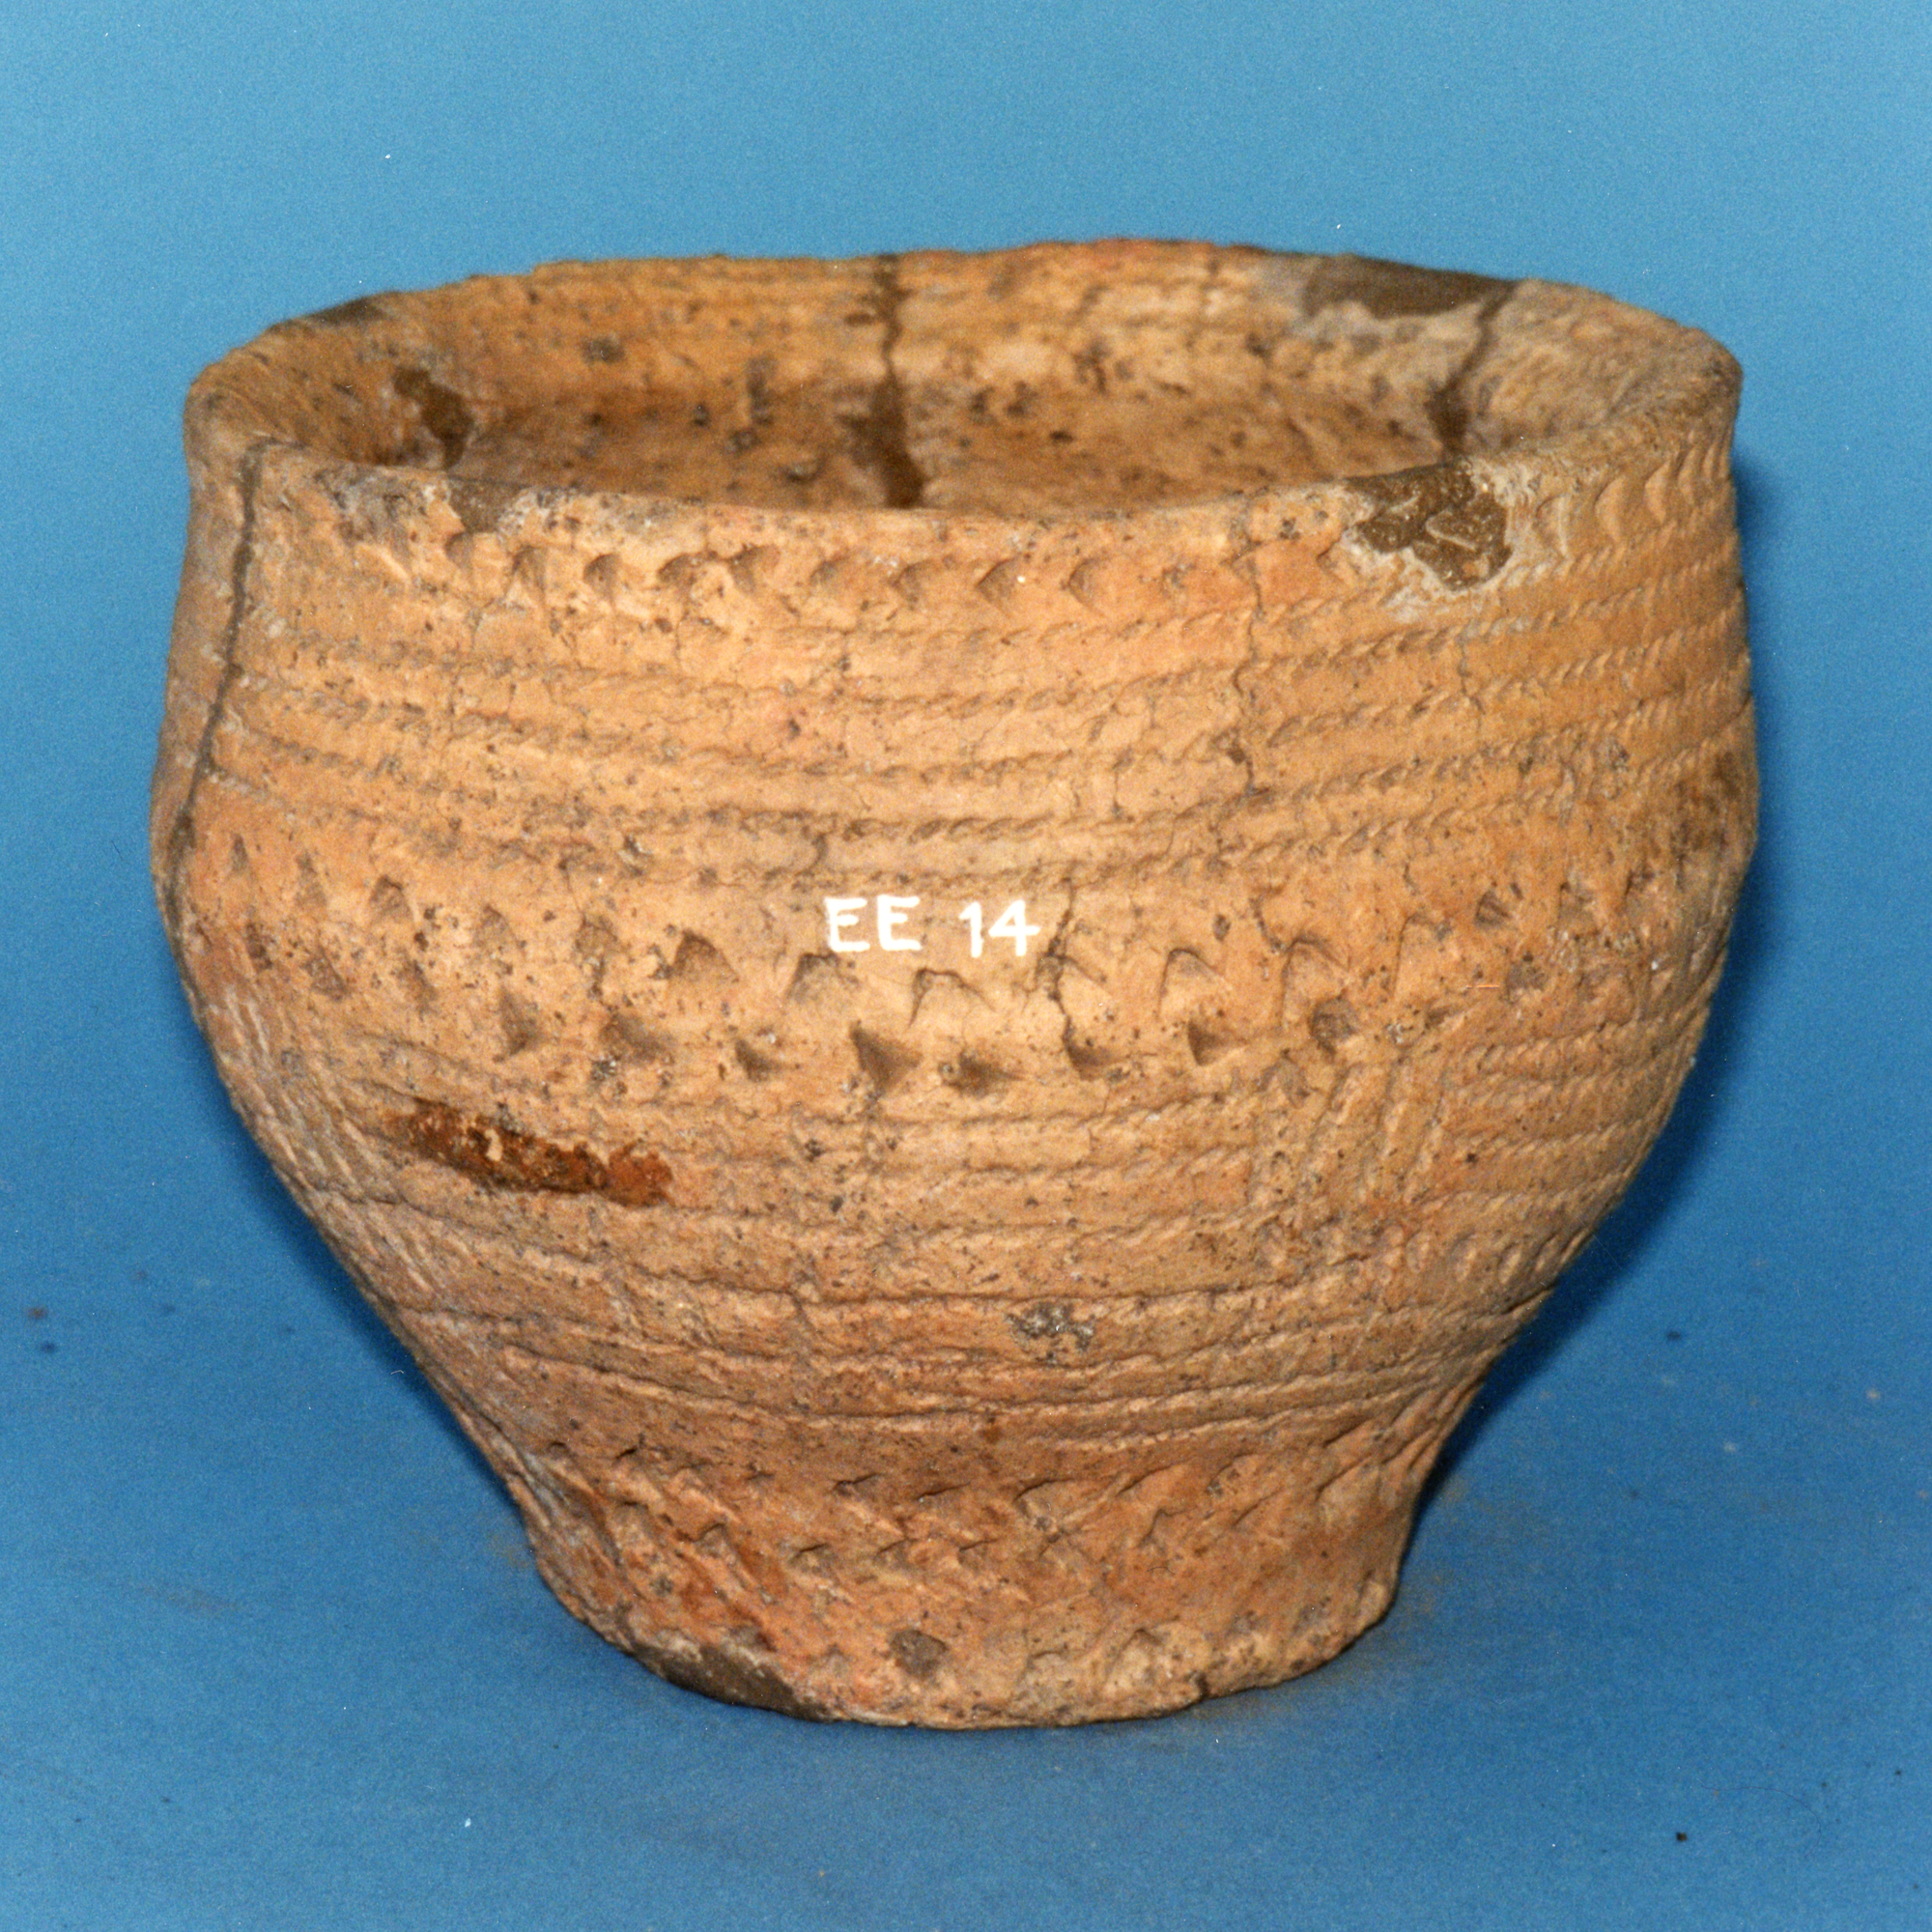 Image of Pottery food vessel from Cramond © National Museums Scotland